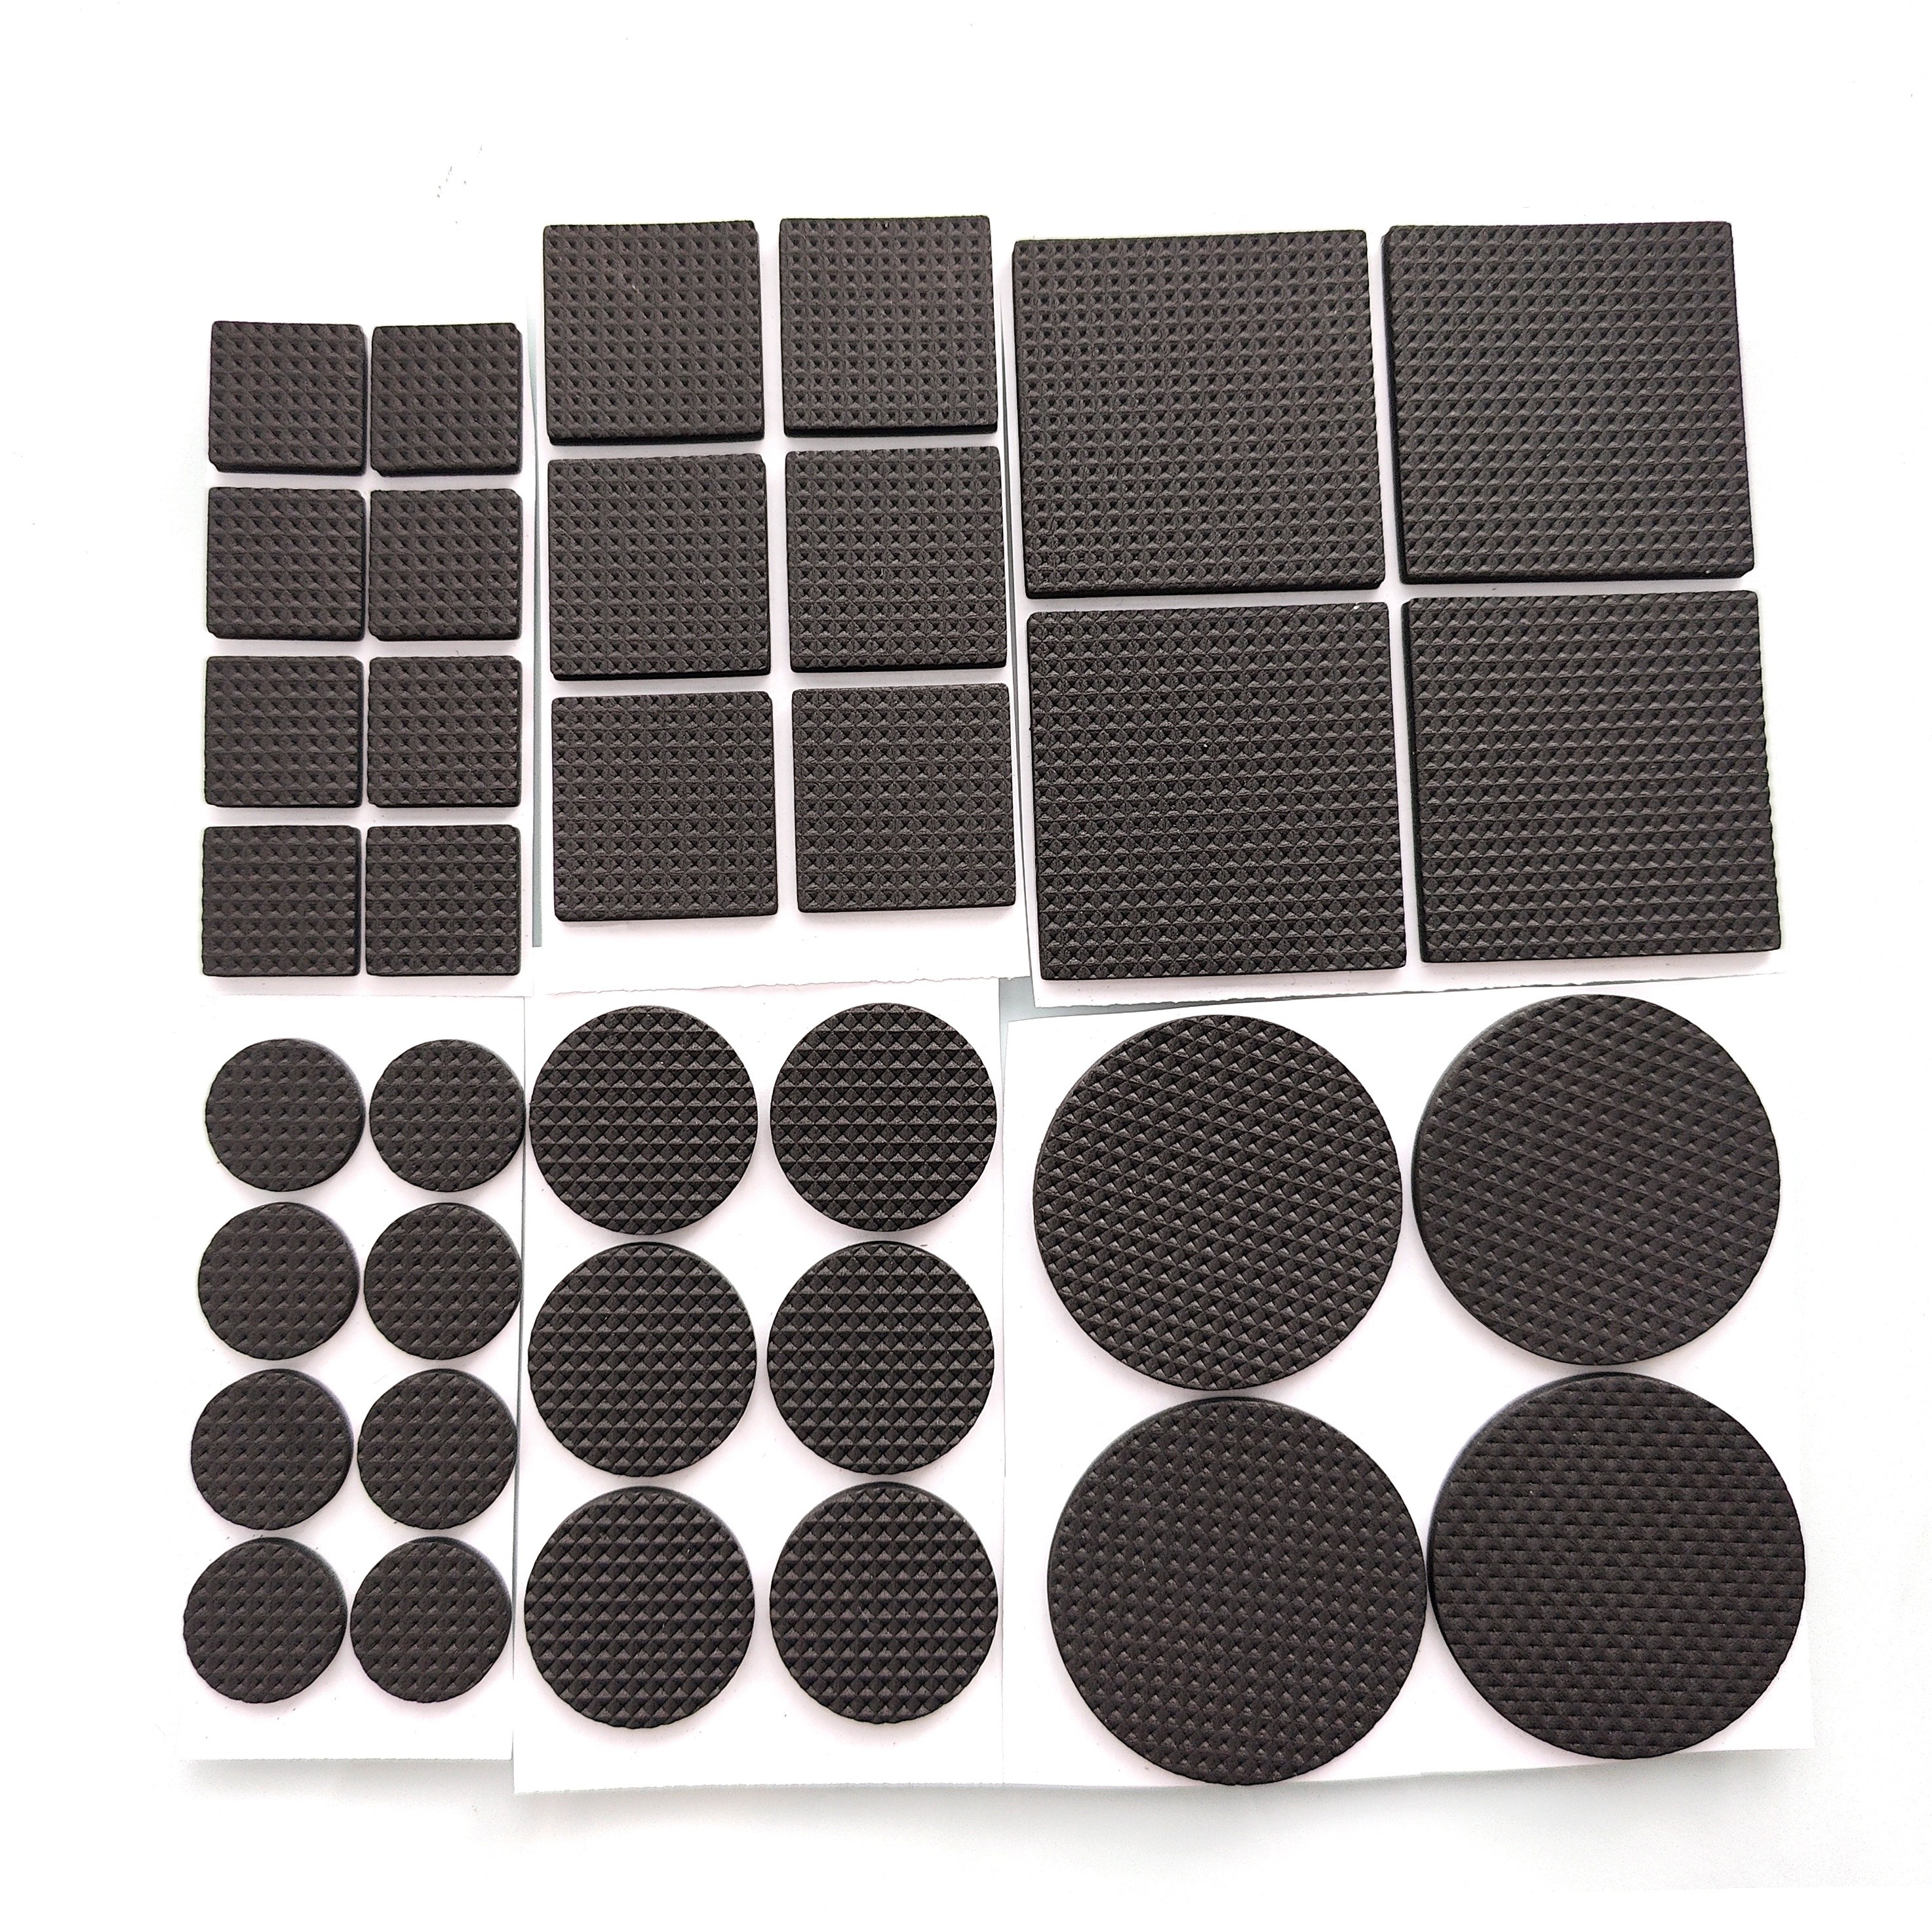 4 Pcs Non-slip Mat Furniture Pads Hardwood Floors Skid Grippers Rubber Grid  Couch Slide Stopper Anti Stoppers